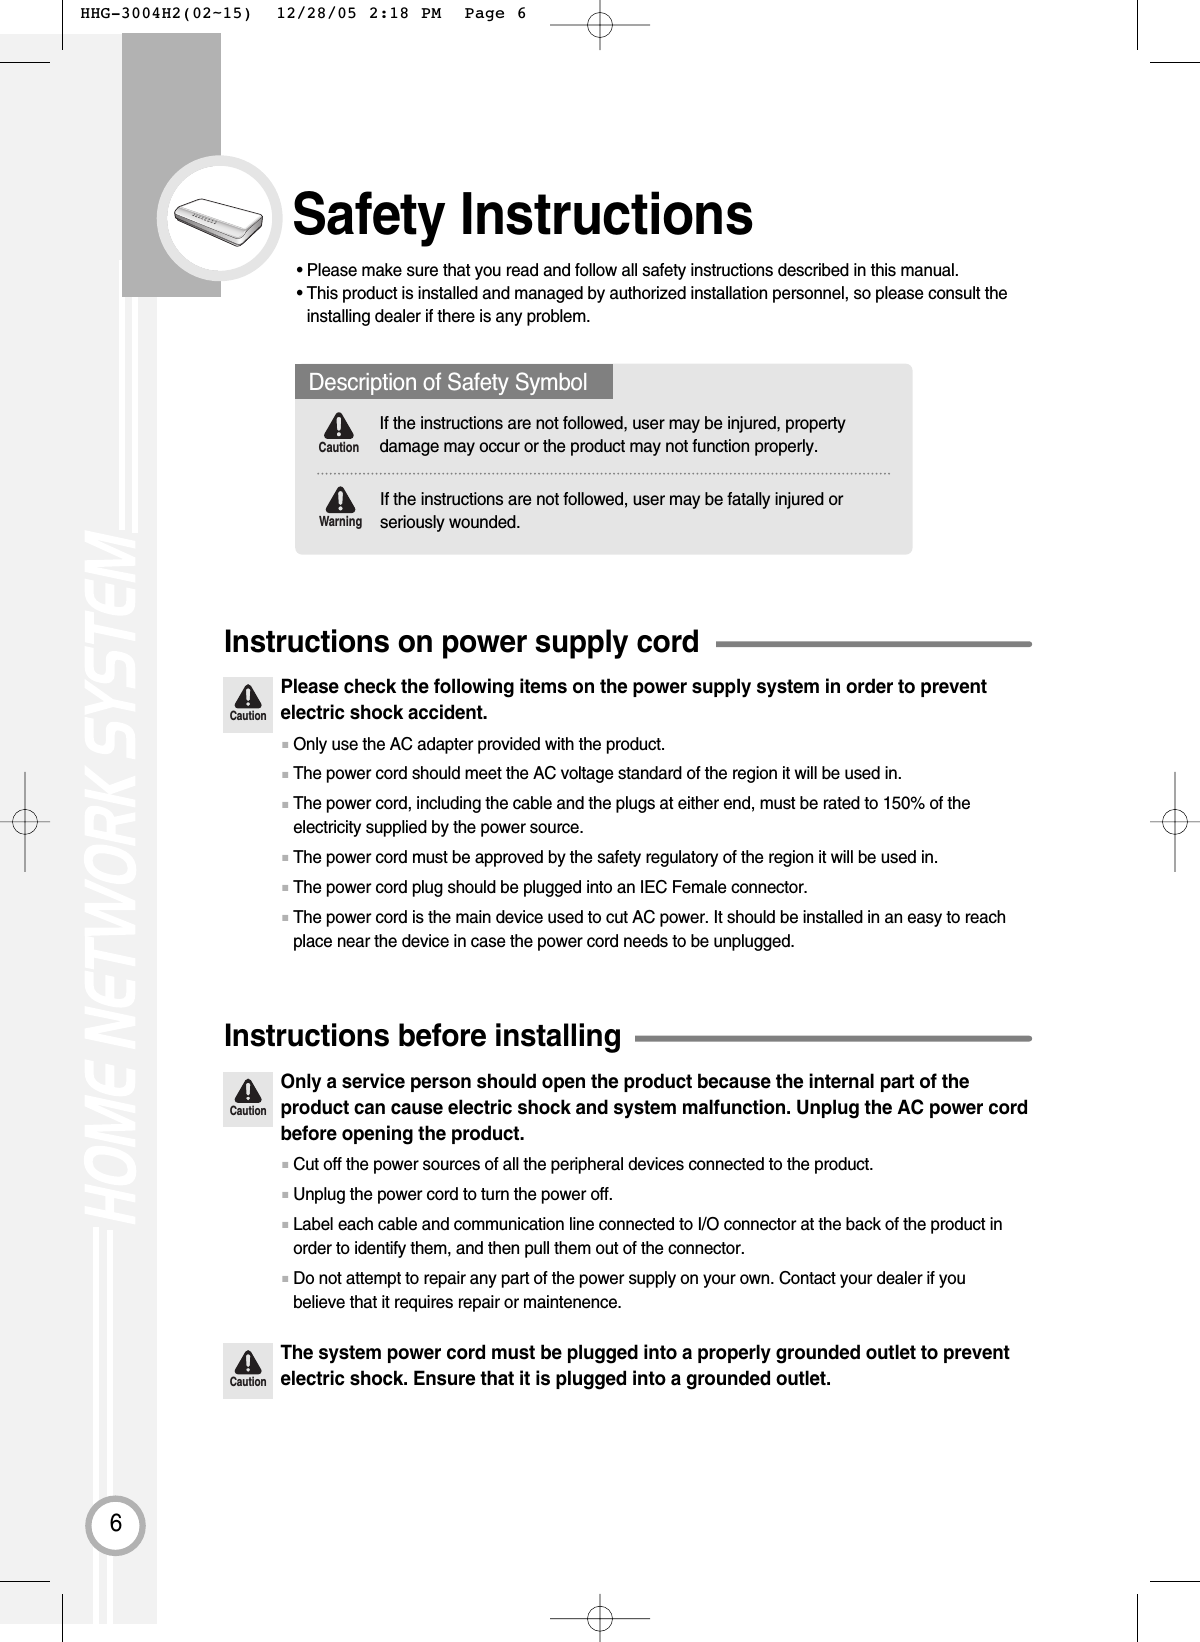 6Safety Instructions• Please make sure that you read and follow all safety instructions described in this manual.• This product is installed and managed by authorized installation personnel, so please consult theinstalling dealer if there is any problem.CautionPlease check the following items on the power supply system in order to preventelectric shock accident.Instructions on power supply cord■Only use the AC adapter provided with the product.■The power cord should meet the AC voltage standard of the region it will be used in.■The power cord, including the cable and the plugs at either end, must be rated to 150% of theelectricity supplied by the power source.■The power cord must be approved by the safety regulatory of the region it will be used in.■The power cord plug should be plugged into an IEC Female connector.■The power cord is the main device used to cut AC power. It should be installed in an easy to reachplace near the device in case the power cord needs to be unplugged. CautionOnly a service person should open the product because the internal part of theproduct can cause electric shock and system malfunction. Unplug the AC power cordbefore opening the product.CautionThe system power cord must be plugged into a properly grounded outlet to preventelectric shock. Ensure that it is plugged into a grounded outlet.Instructions before installing■Cut off the power sources of all the peripheral devices connected to the product.■Unplug the power cord to turn the power off.■Label each cable and communication line connected to I/O connector at the back of the product inorder to identify them, and then pull them out of the connector. ■Do not attempt to repair any part of the power supply on your own. Contact your dealer if youbelieve that it requires repair or maintenence.Description of Safety SymbolIf the instructions are not followed, user may be injured, propertydamage may occur or the product may not function properly.If the instructions are not followed, user may be fatally injured orseriously wounded.WarningCaution HHG-3004H2(02~15)  12/28/05 2:18 PM  Page 6